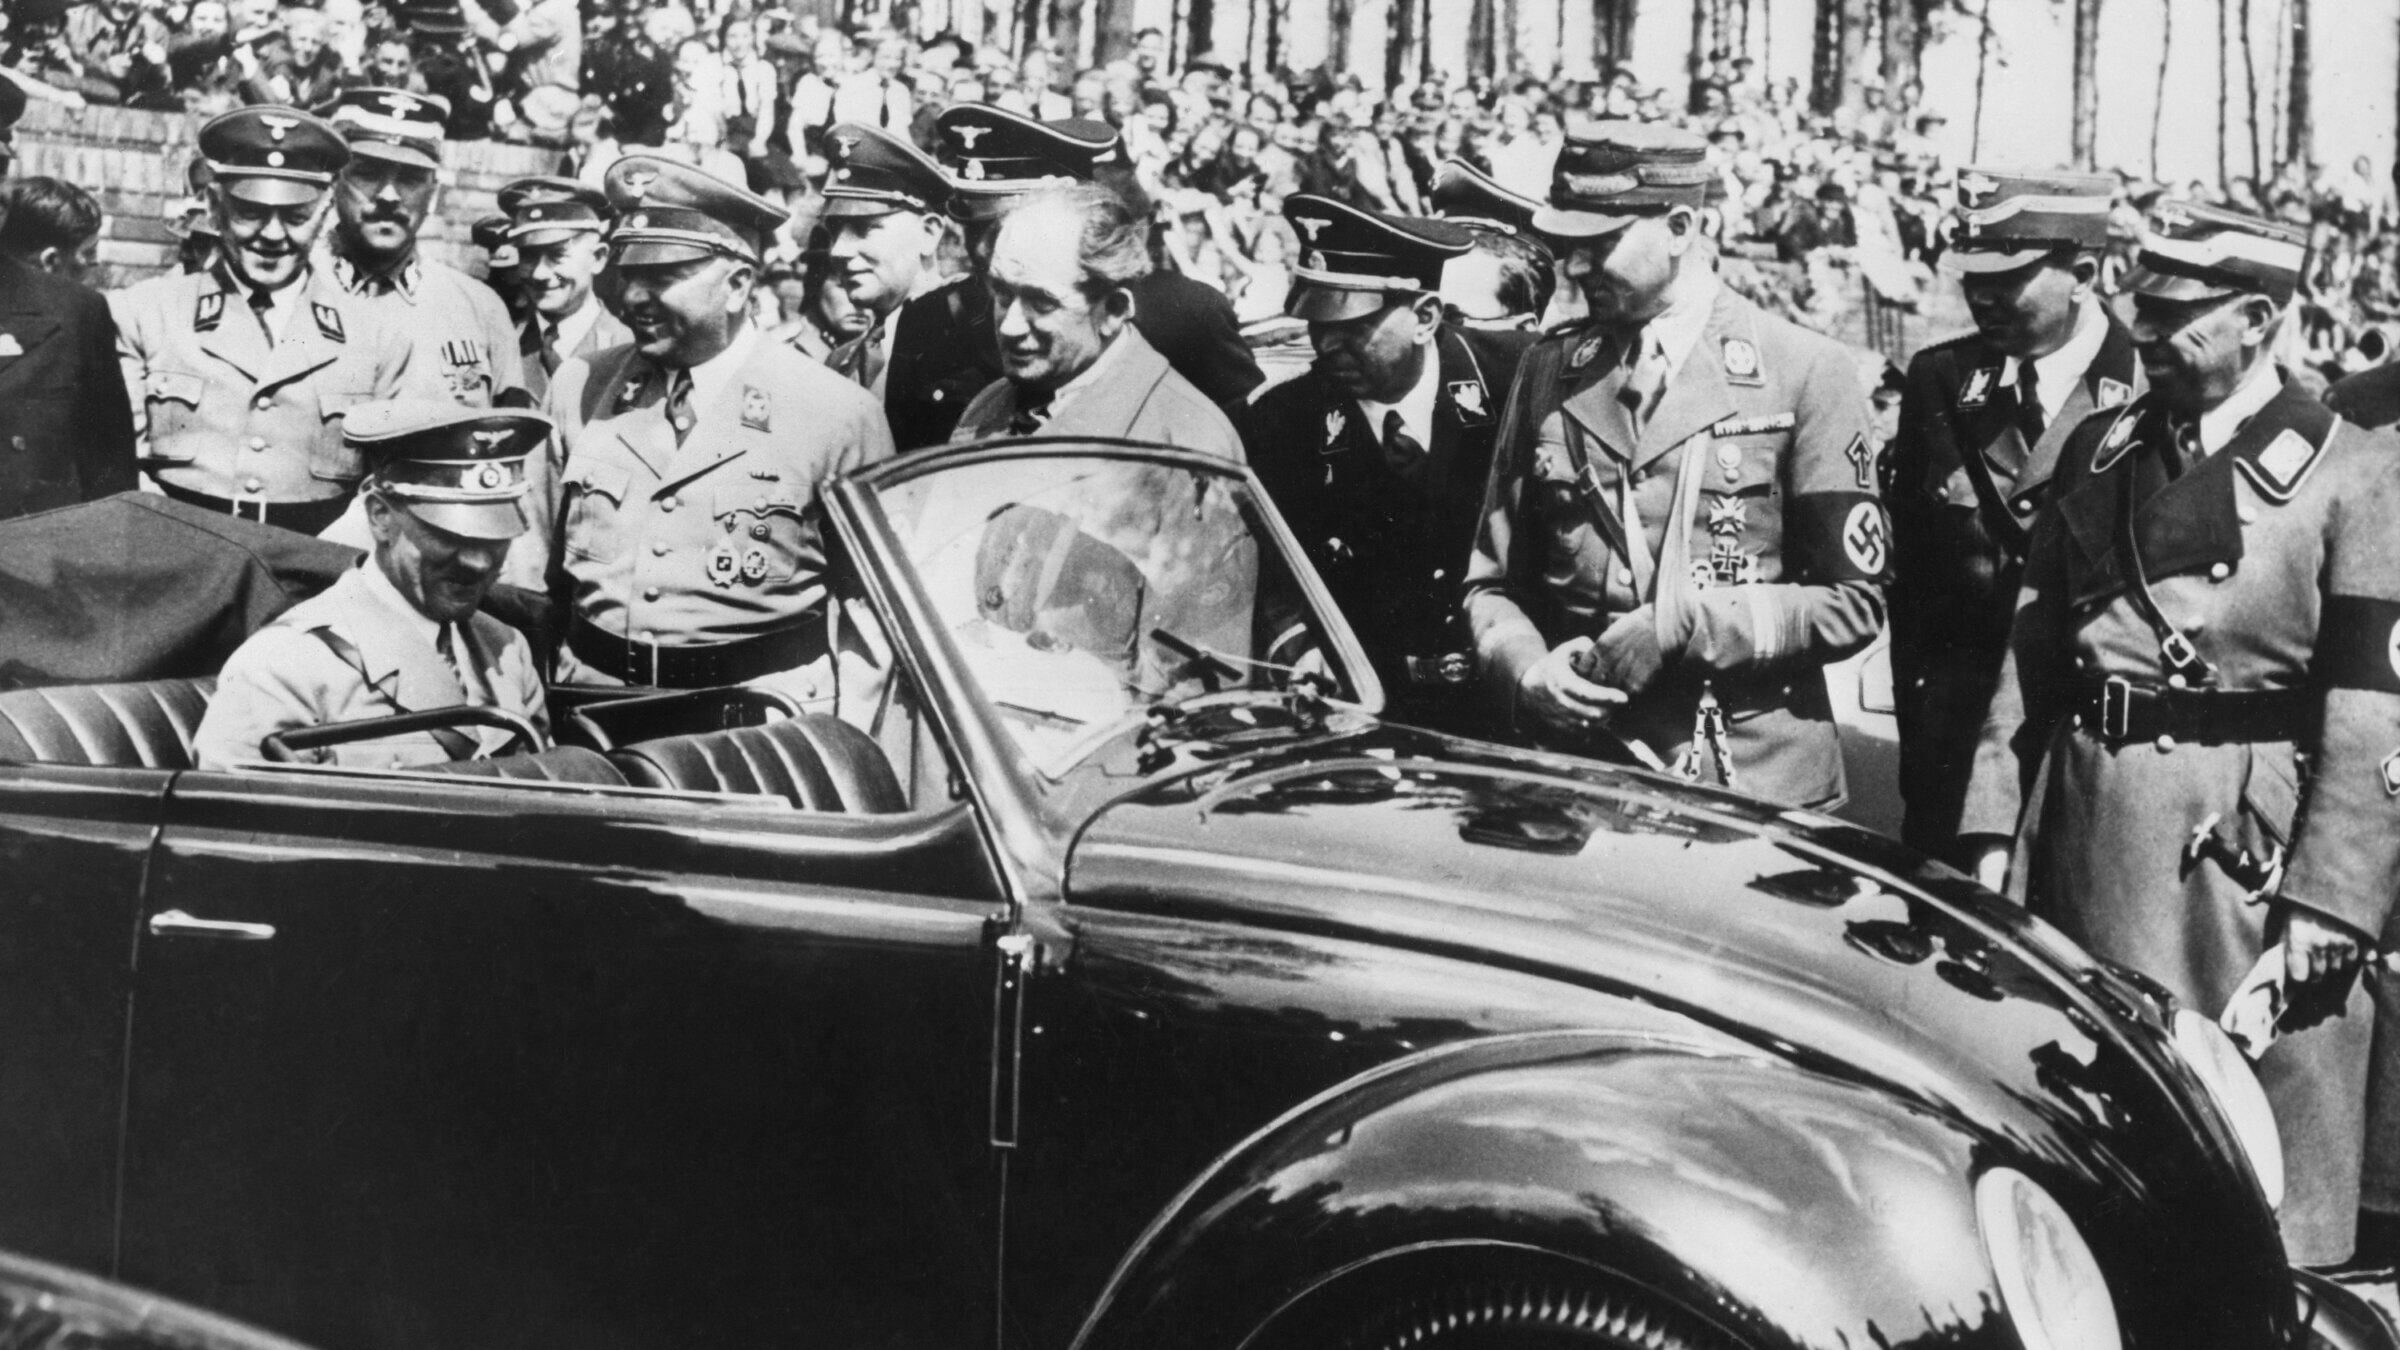 Adolf Hitler (seated in back) inspects the first Volkswagen "Beetle" produced in Stuttgart in 1937. 